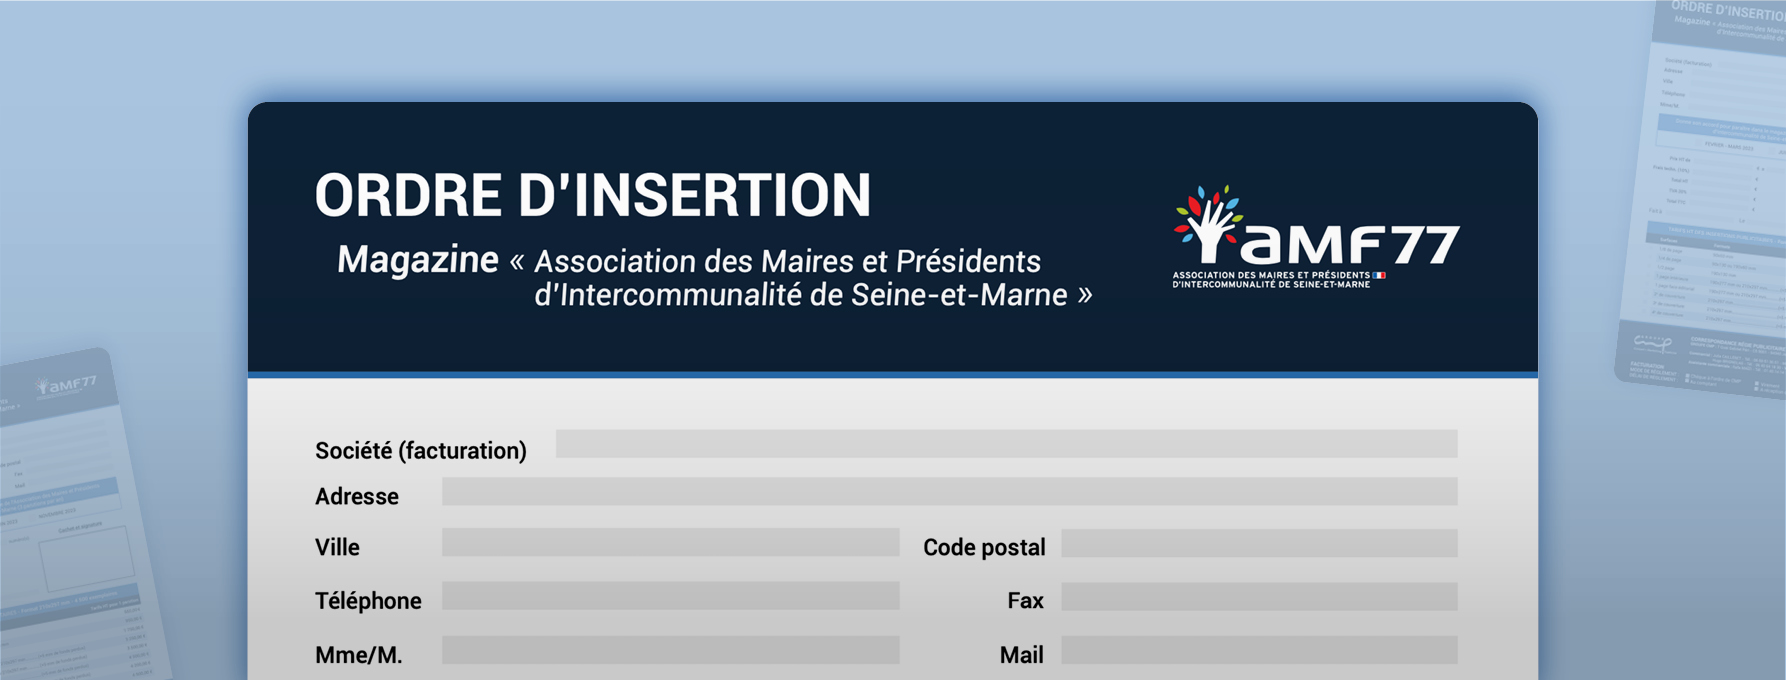 banniere-ordre-inserion-amf77-groupe-cmp